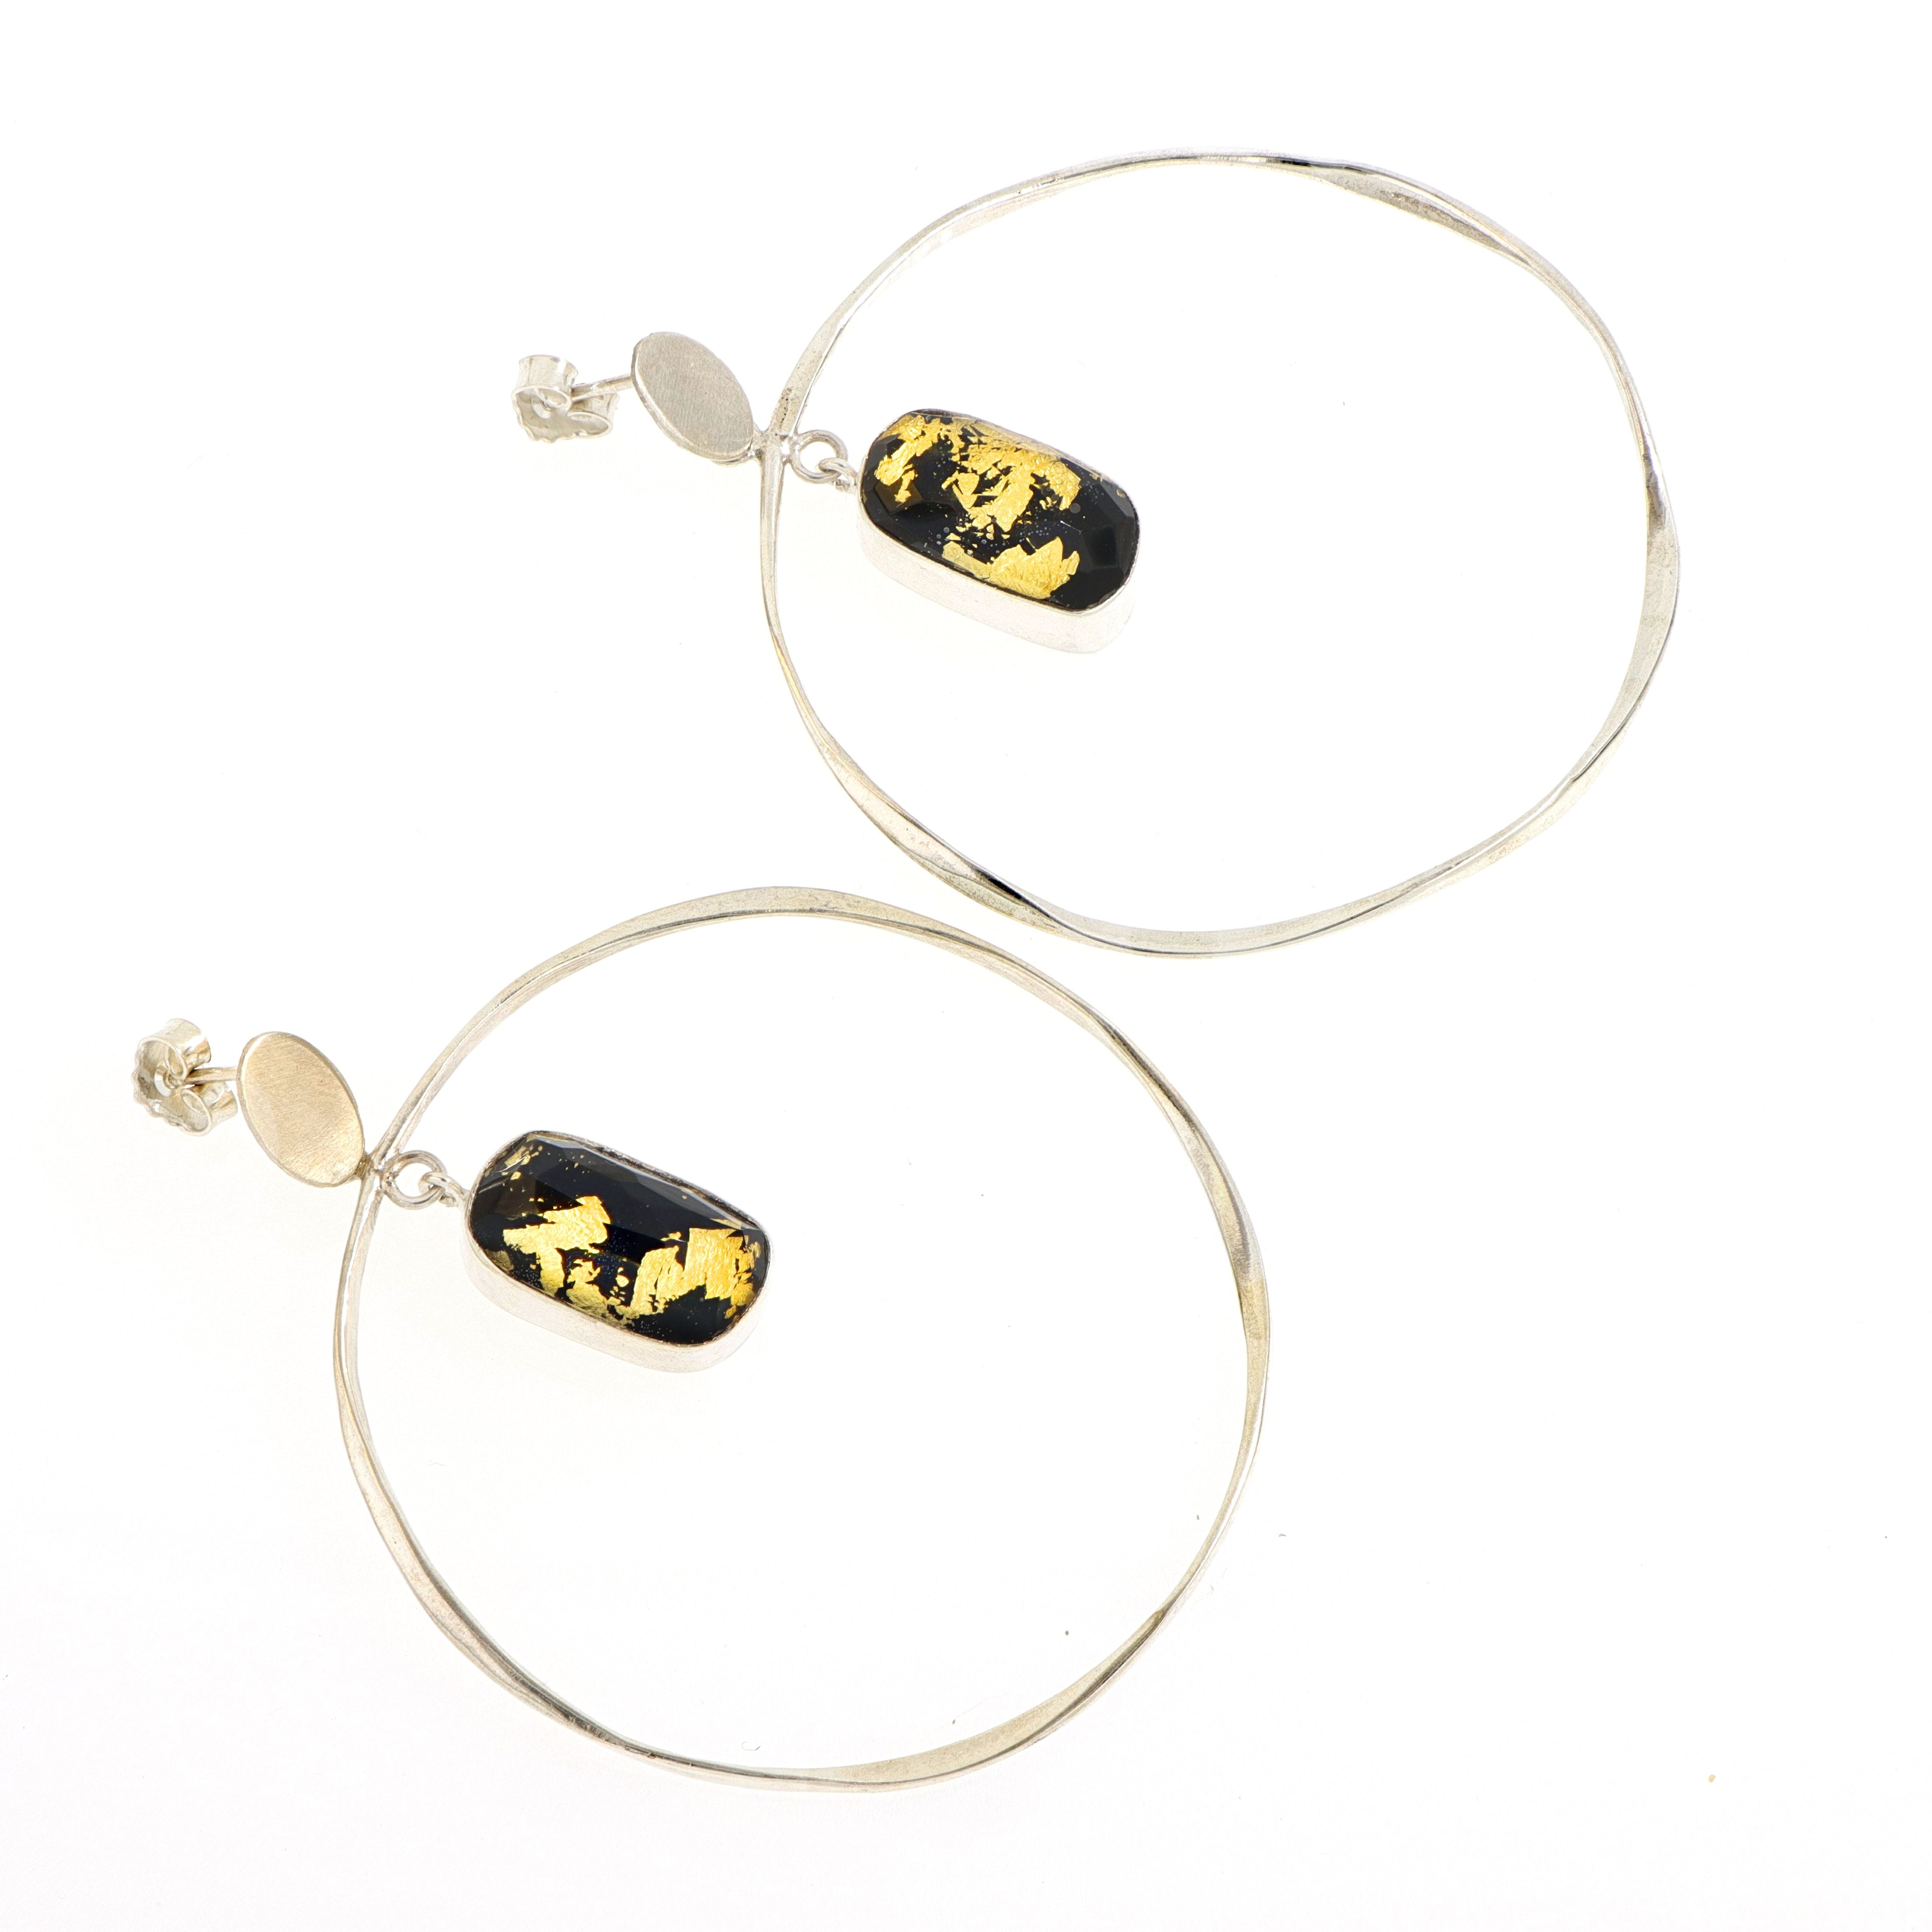 Athena hoops with black Onyx and gold leaves